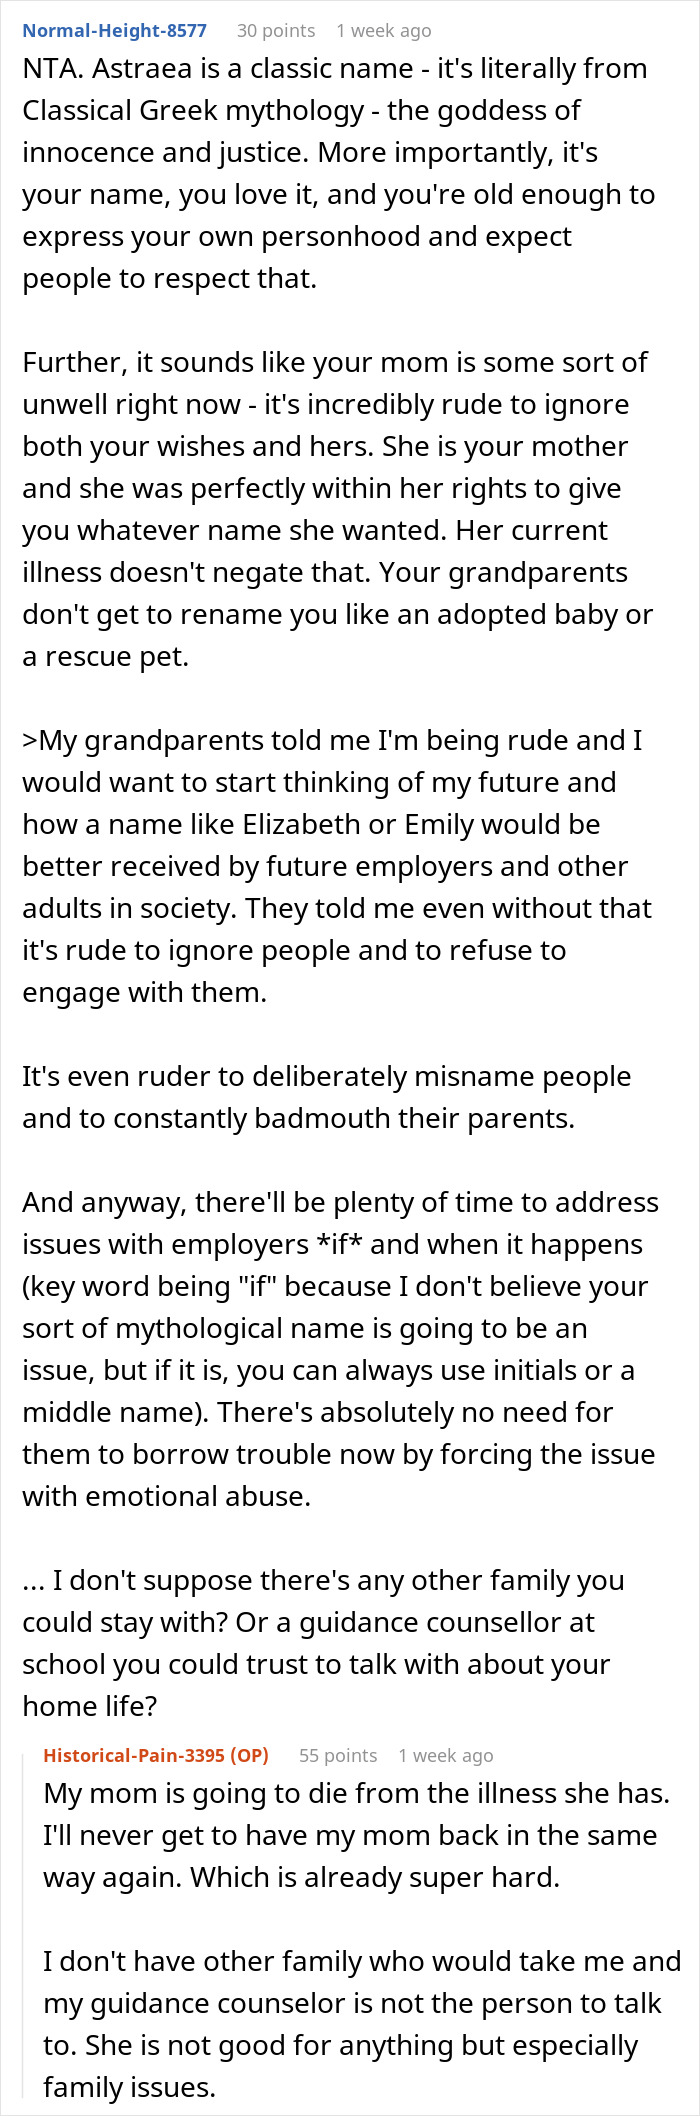 Grandparents Think It’s Okay To ‘Rename’ Granddaughter As They Don’t Like Her Name, She Ignores Them